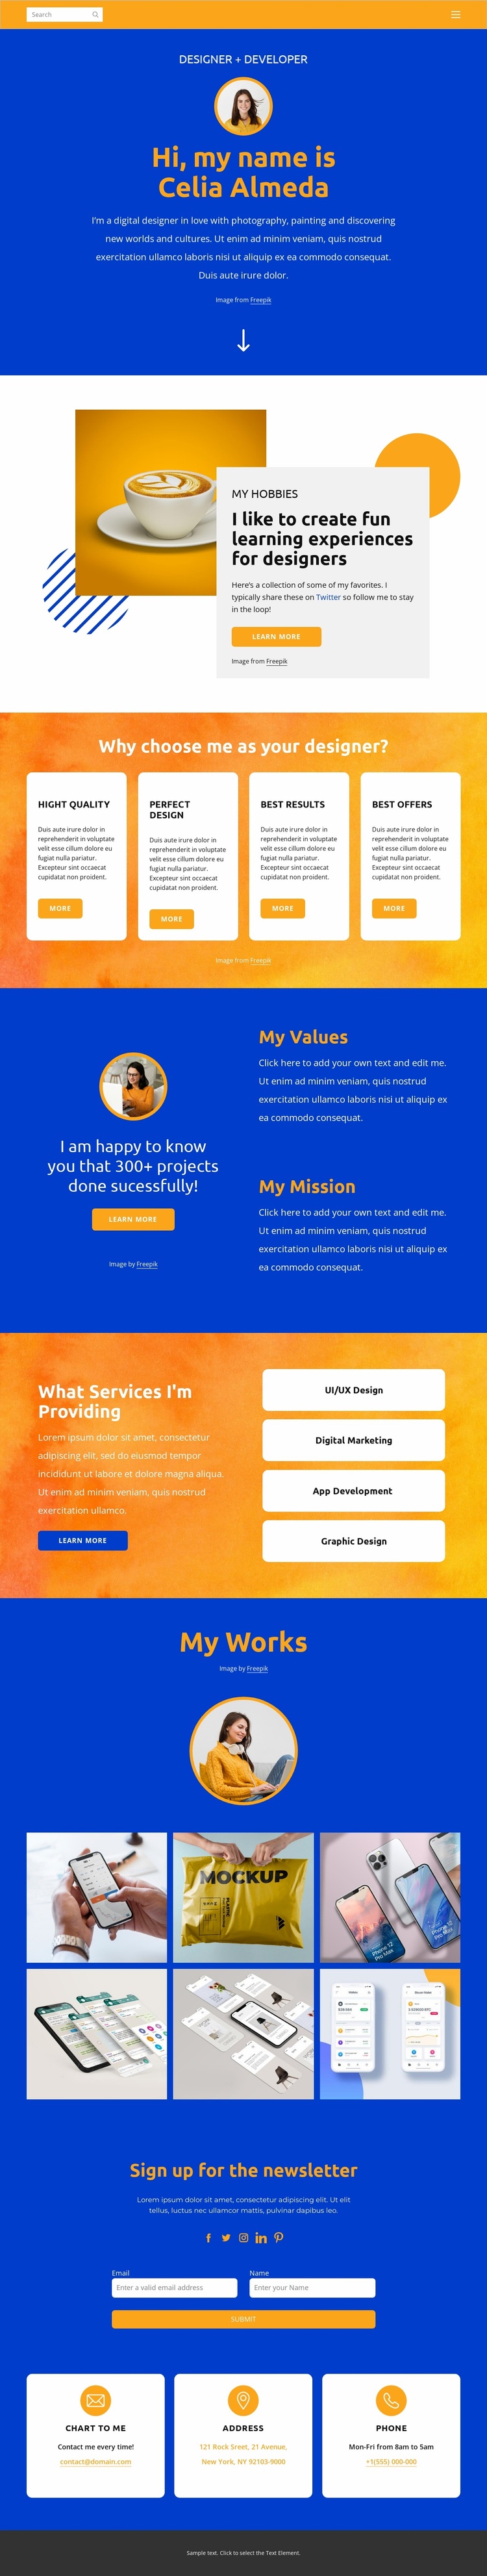 Developing with a passion Landing Page